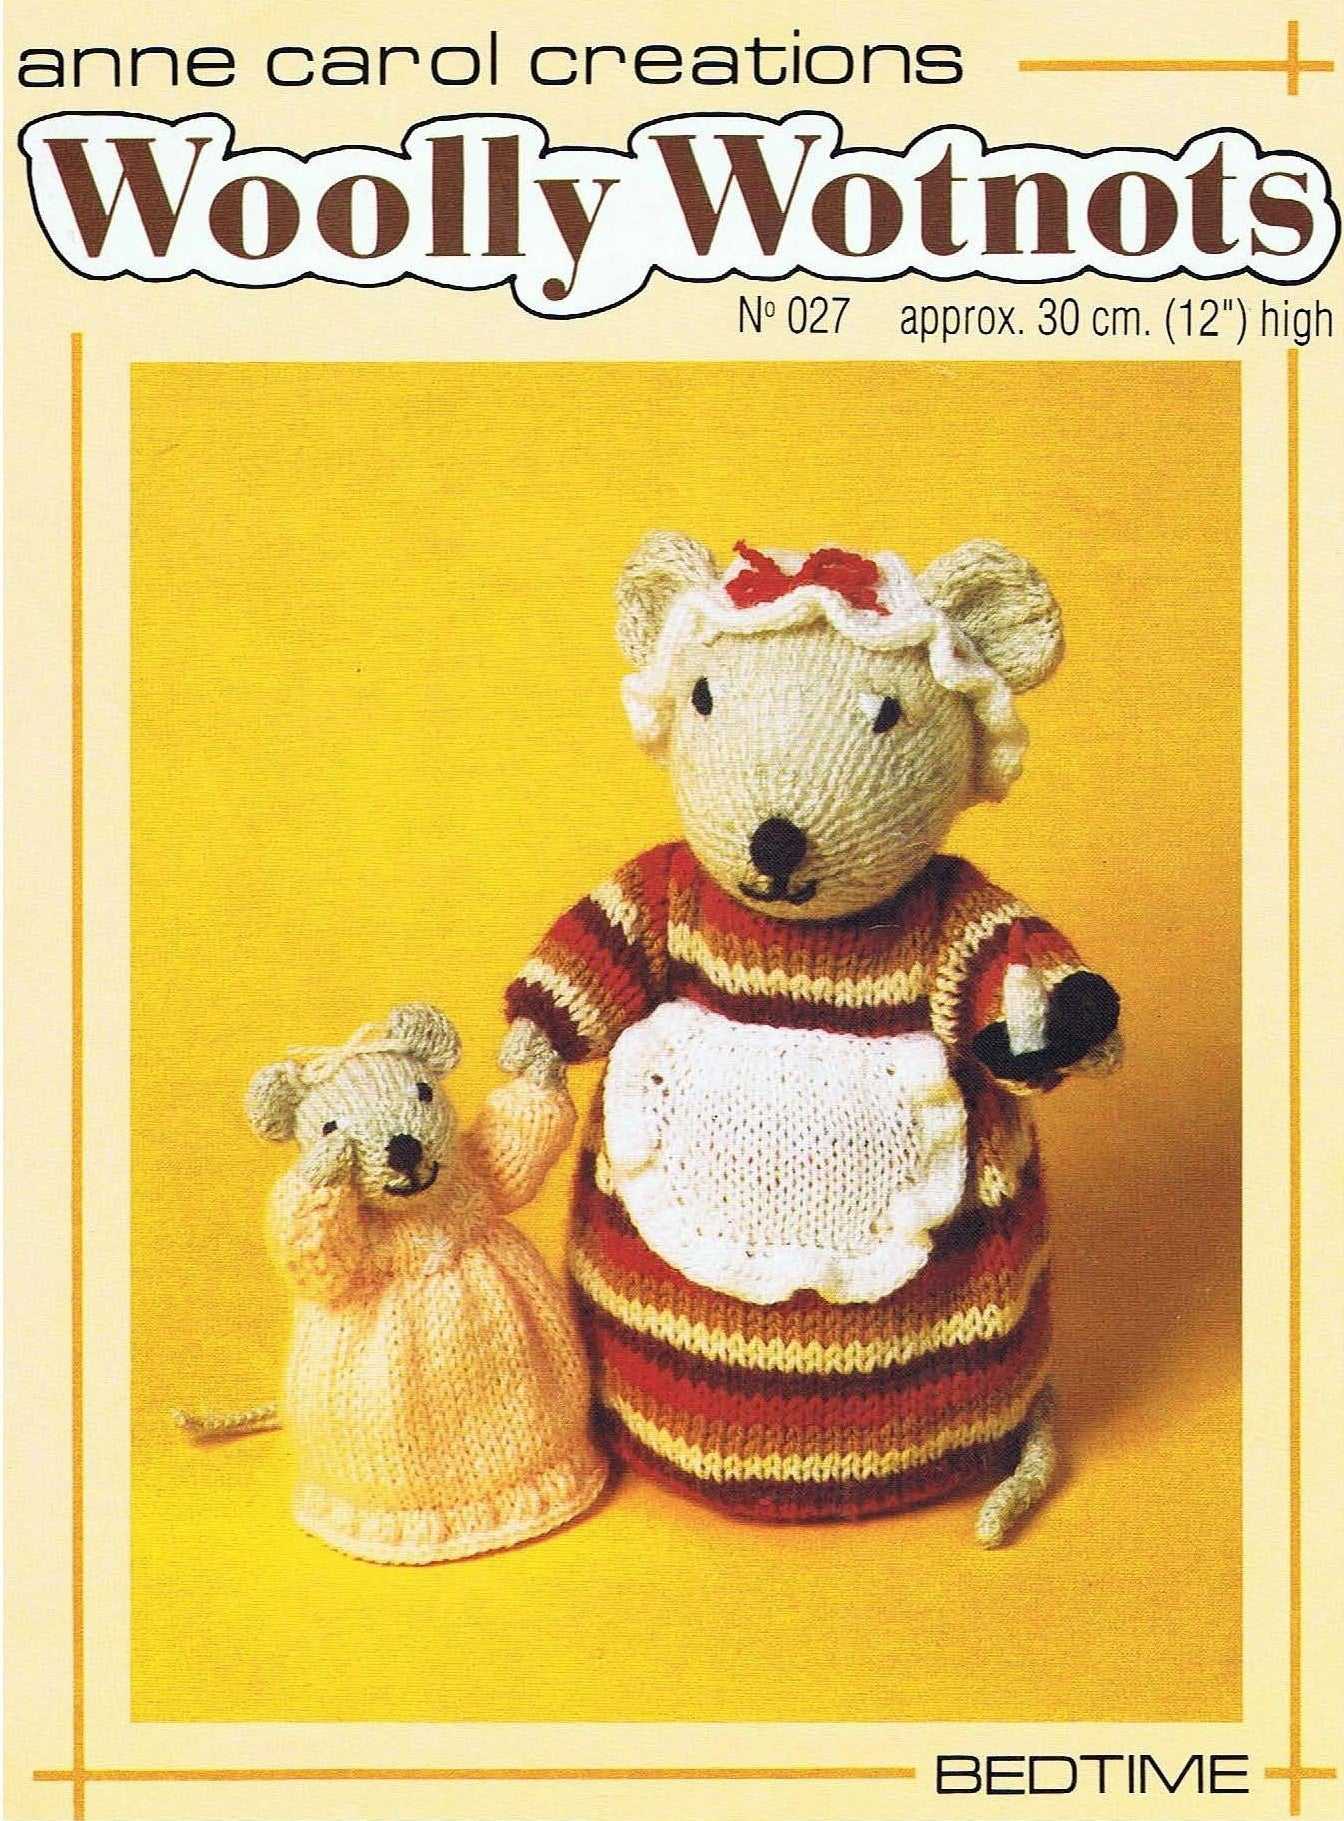  Woolly Wotnots Bedtime Mouse Knitting Pattern by Cross Stitch Chart Heaven sold by Free Spirit Accessories